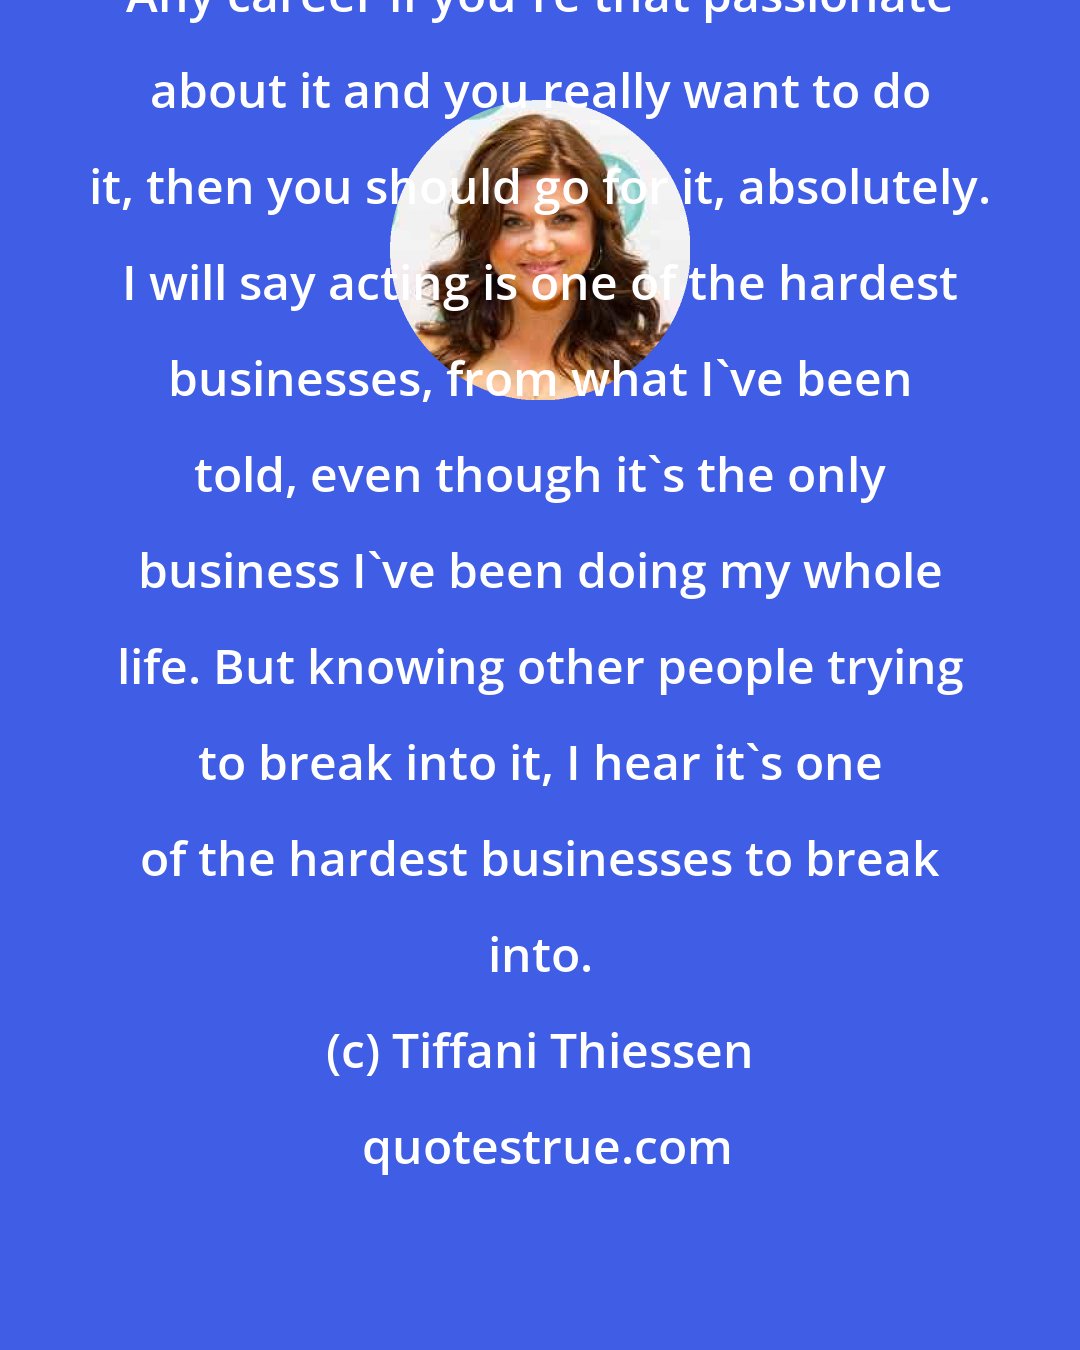 Tiffani Thiessen: Any career if you're that passionate about it and you really want to do it, then you should go for it, absolutely. I will say acting is one of the hardest businesses, from what I've been told, even though it's the only business I've been doing my whole life. But knowing other people trying to break into it, I hear it's one of the hardest businesses to break into.